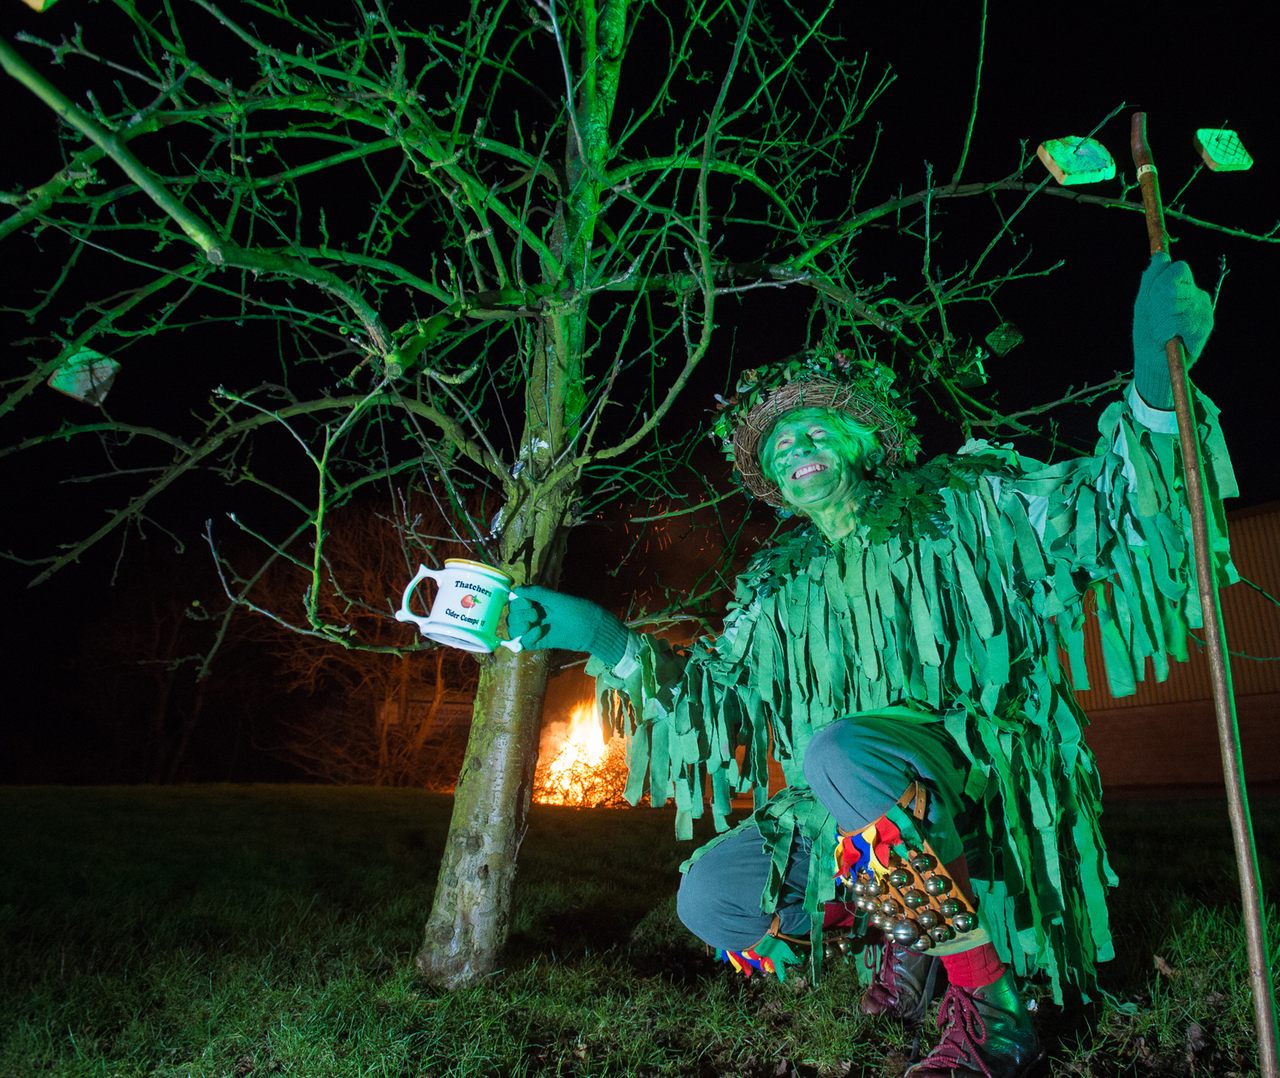 A Green Man enjoying some cider and a fire.